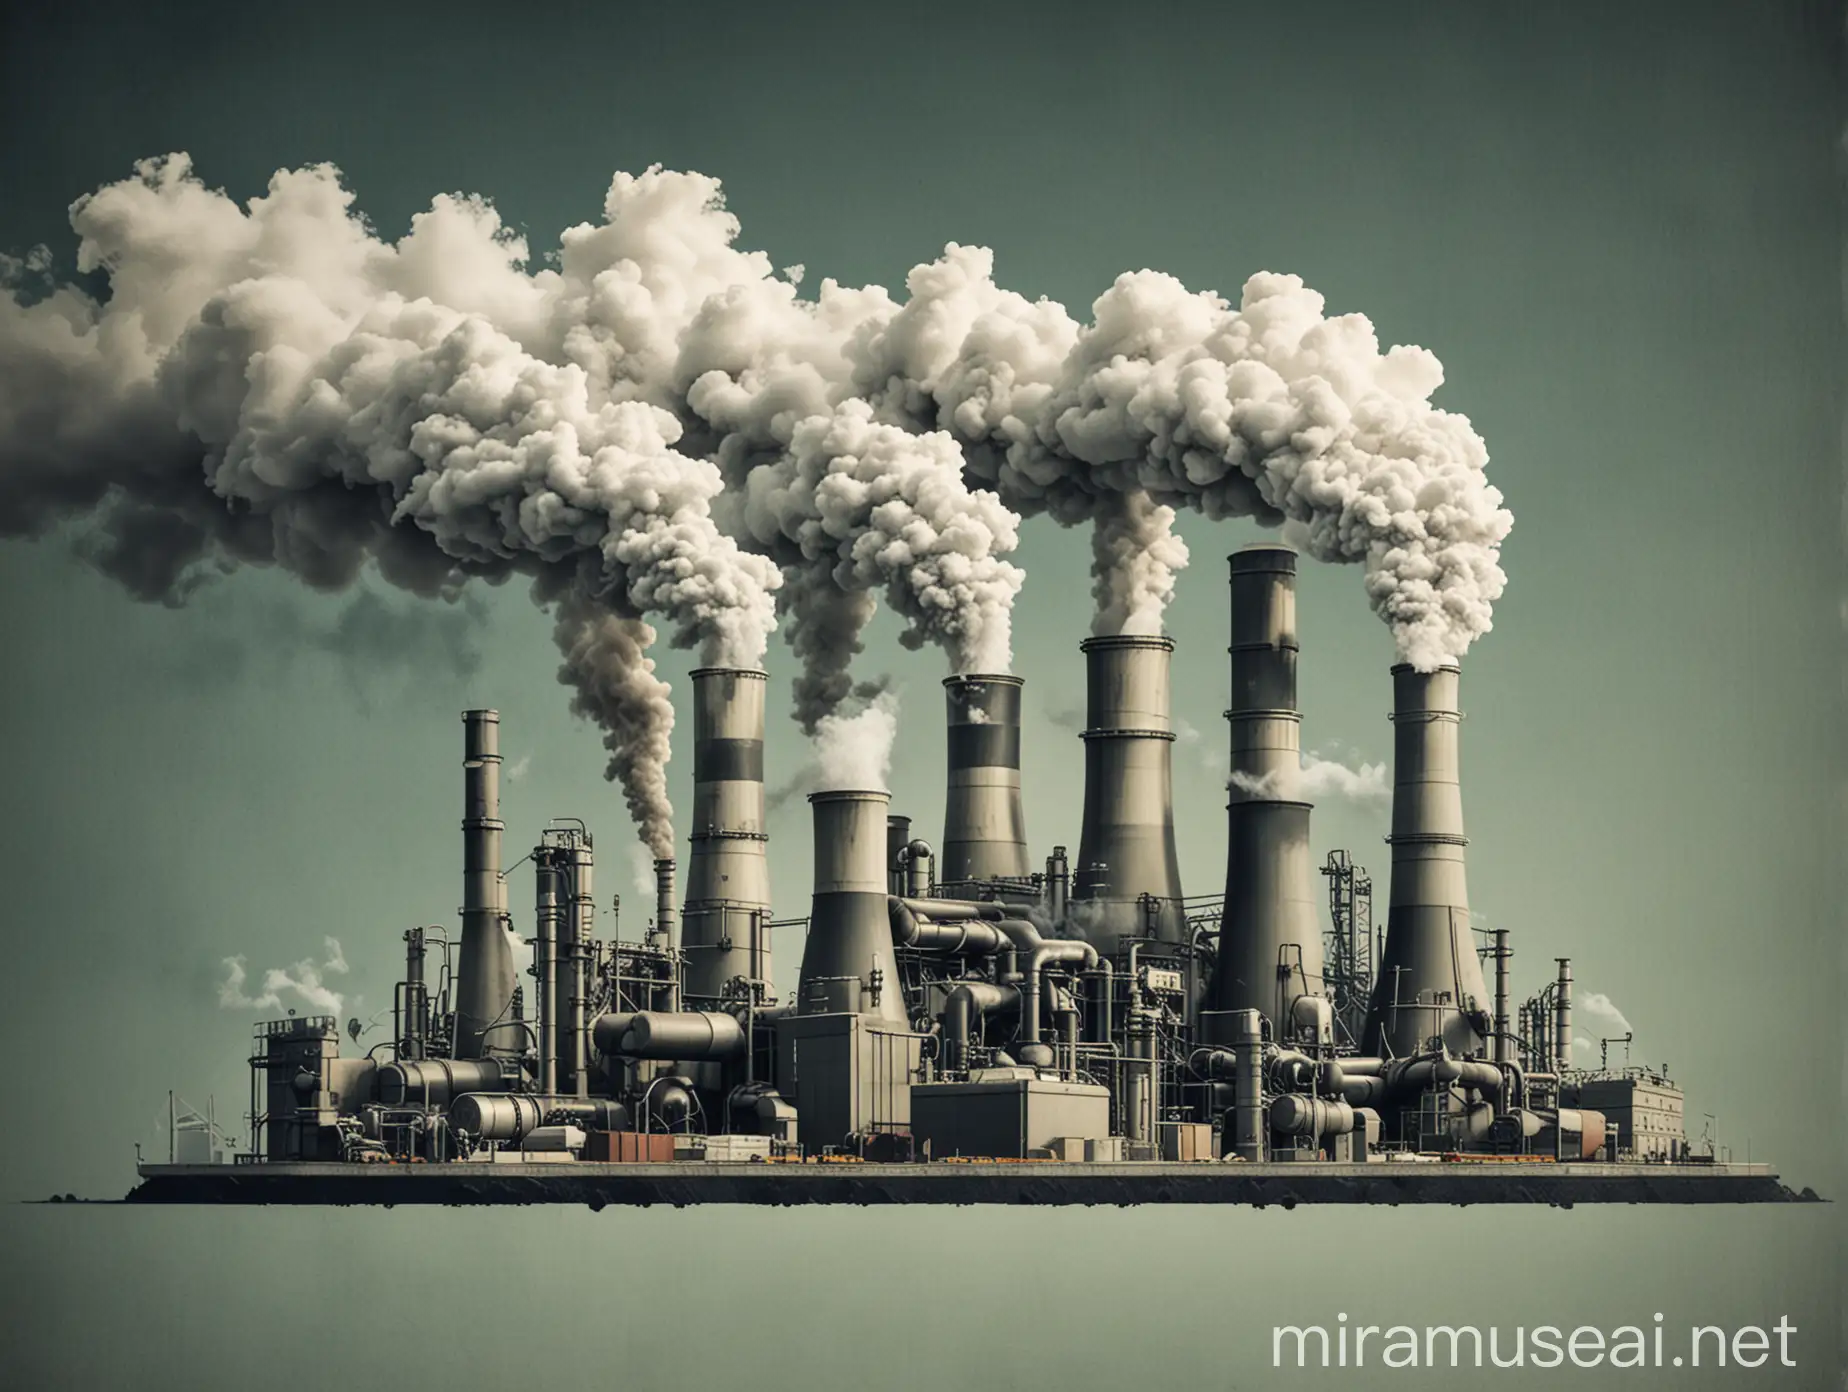 create in illustration showing Carbon dioxide emission from industries